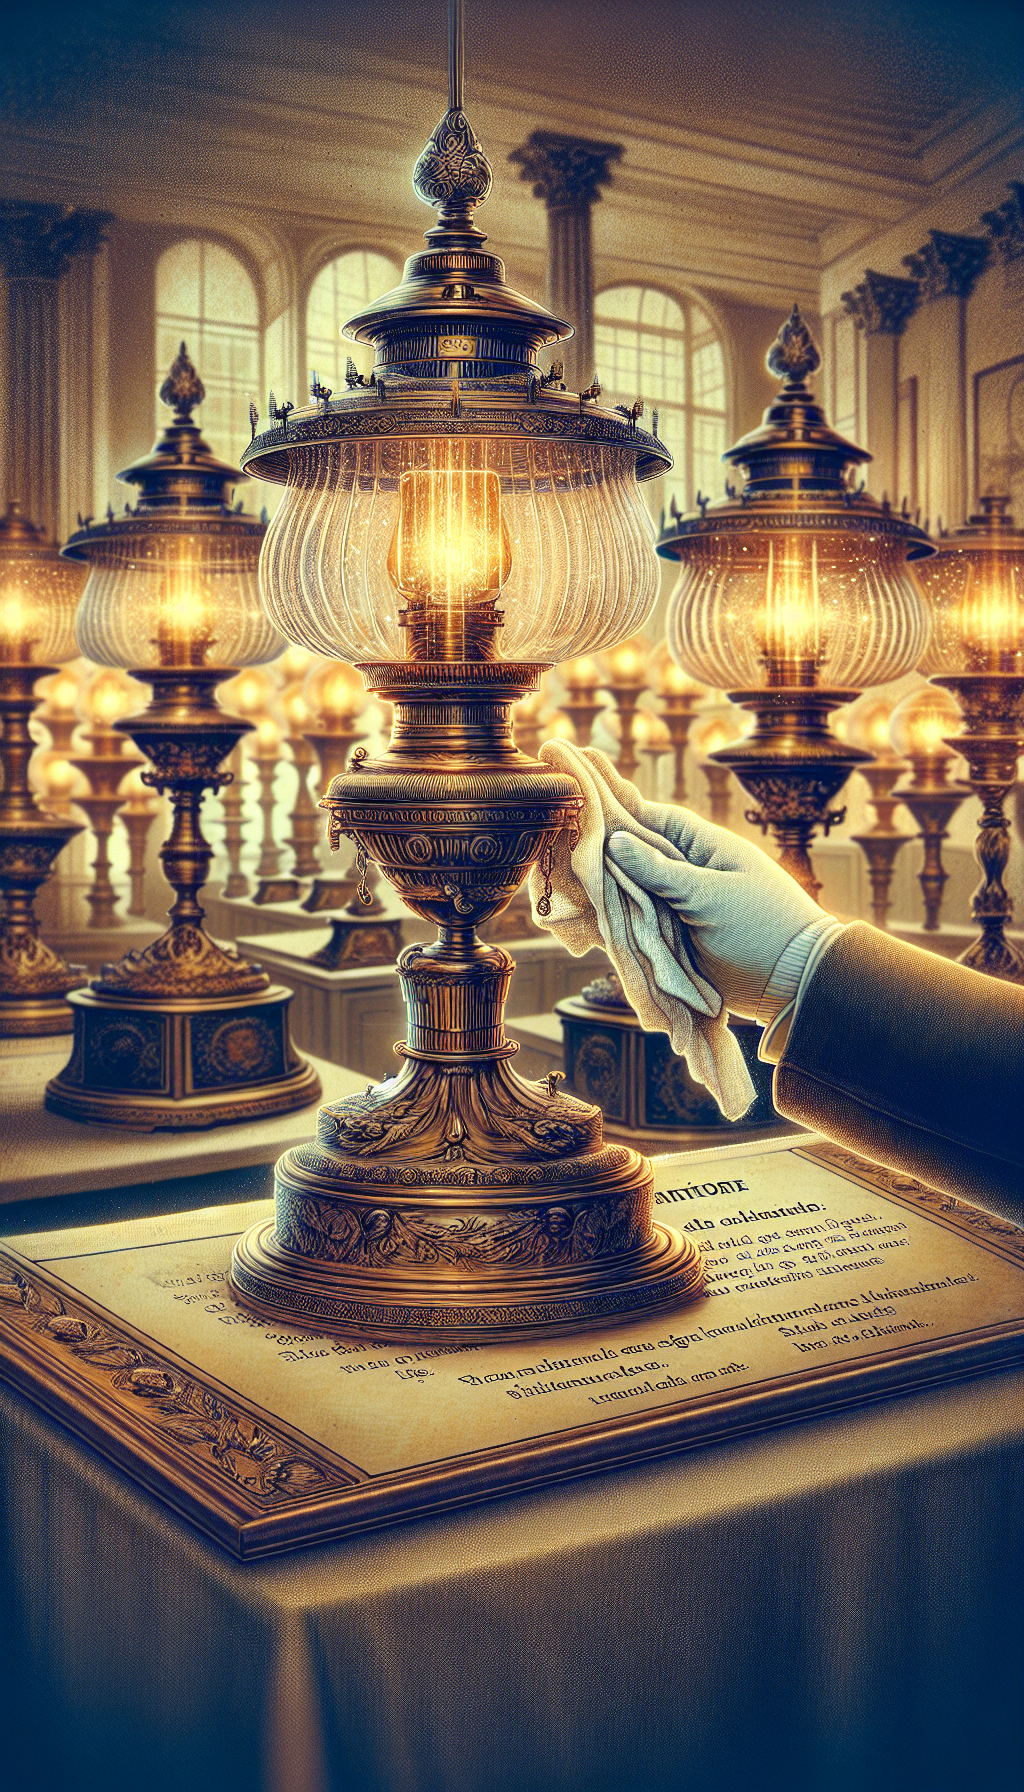 An elegantly detailed drawing showcases an array of antique electric hurricane lamps, restored to their original luster, being carefully dusted by white-gloved hands. In the background, a soft-focus gallery displays these glowing treasures on ornate pedestals with placards detailing care instructions, while a shimmering light casts a warm, inviting ambiance. Image format: 4:3.